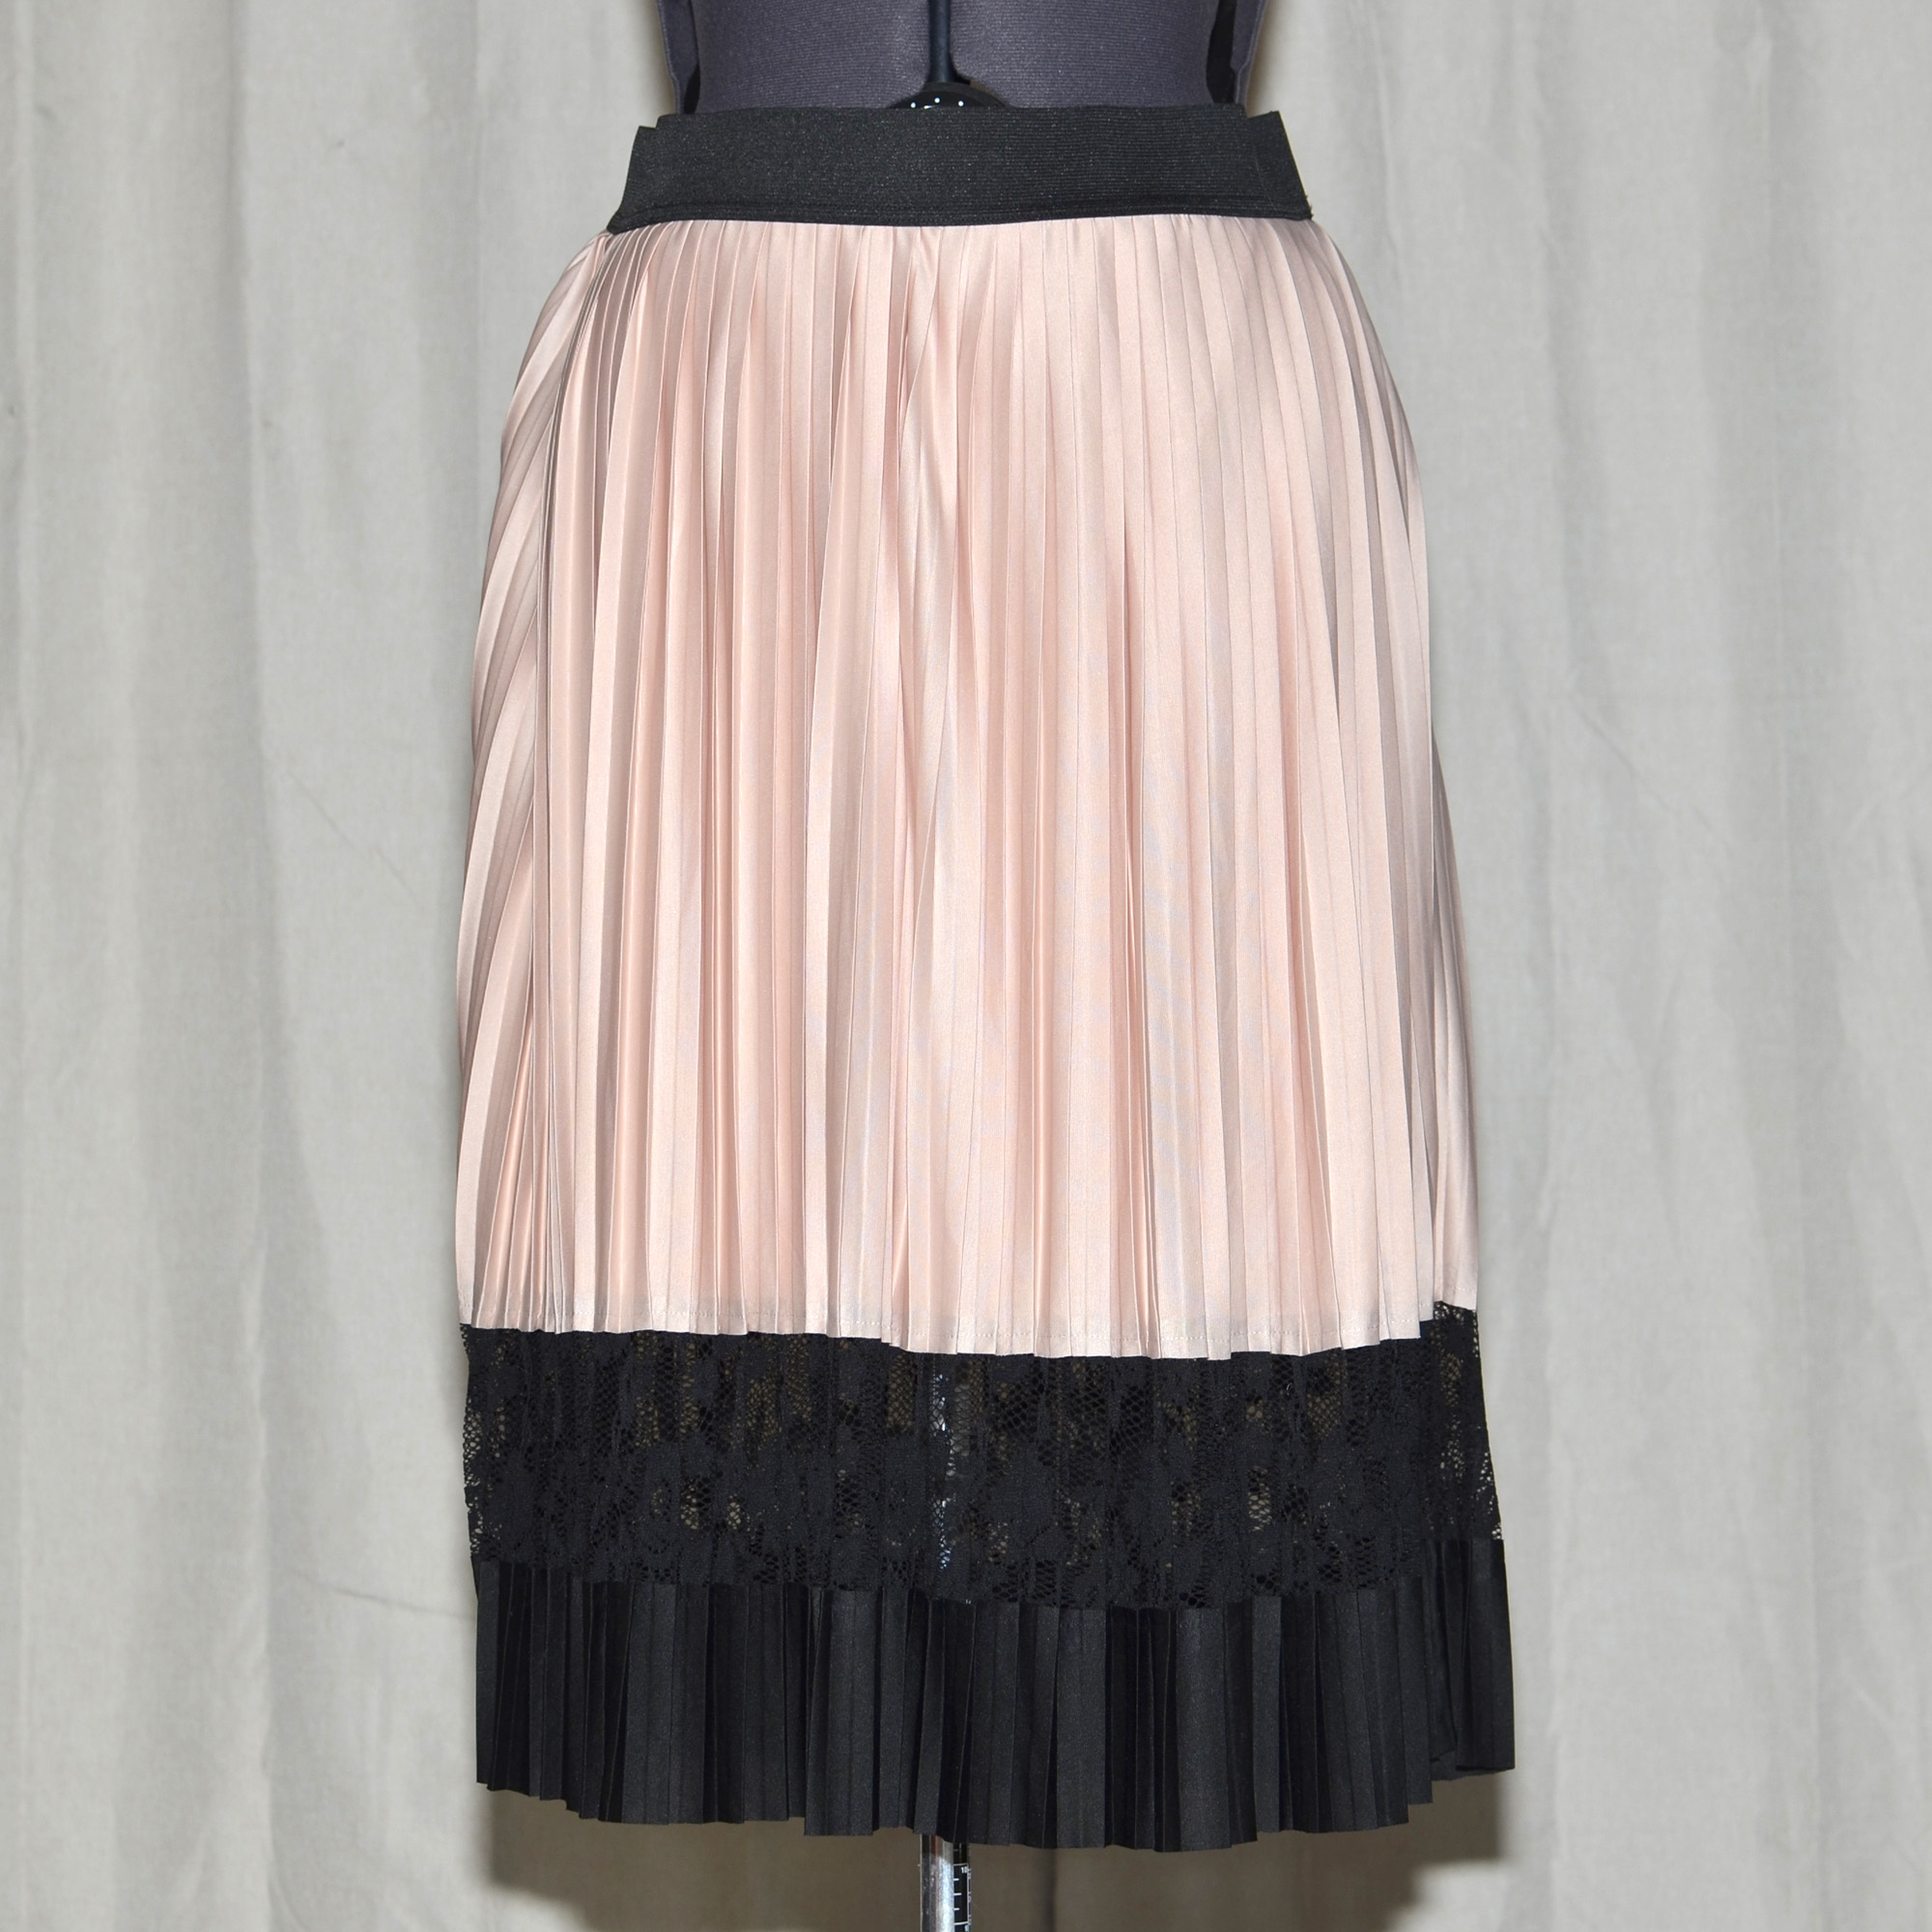 Lane Bryant plus size circle / skater skirt with thin accordion pleats in blush pink, with contrasting black lace panel and waistband.